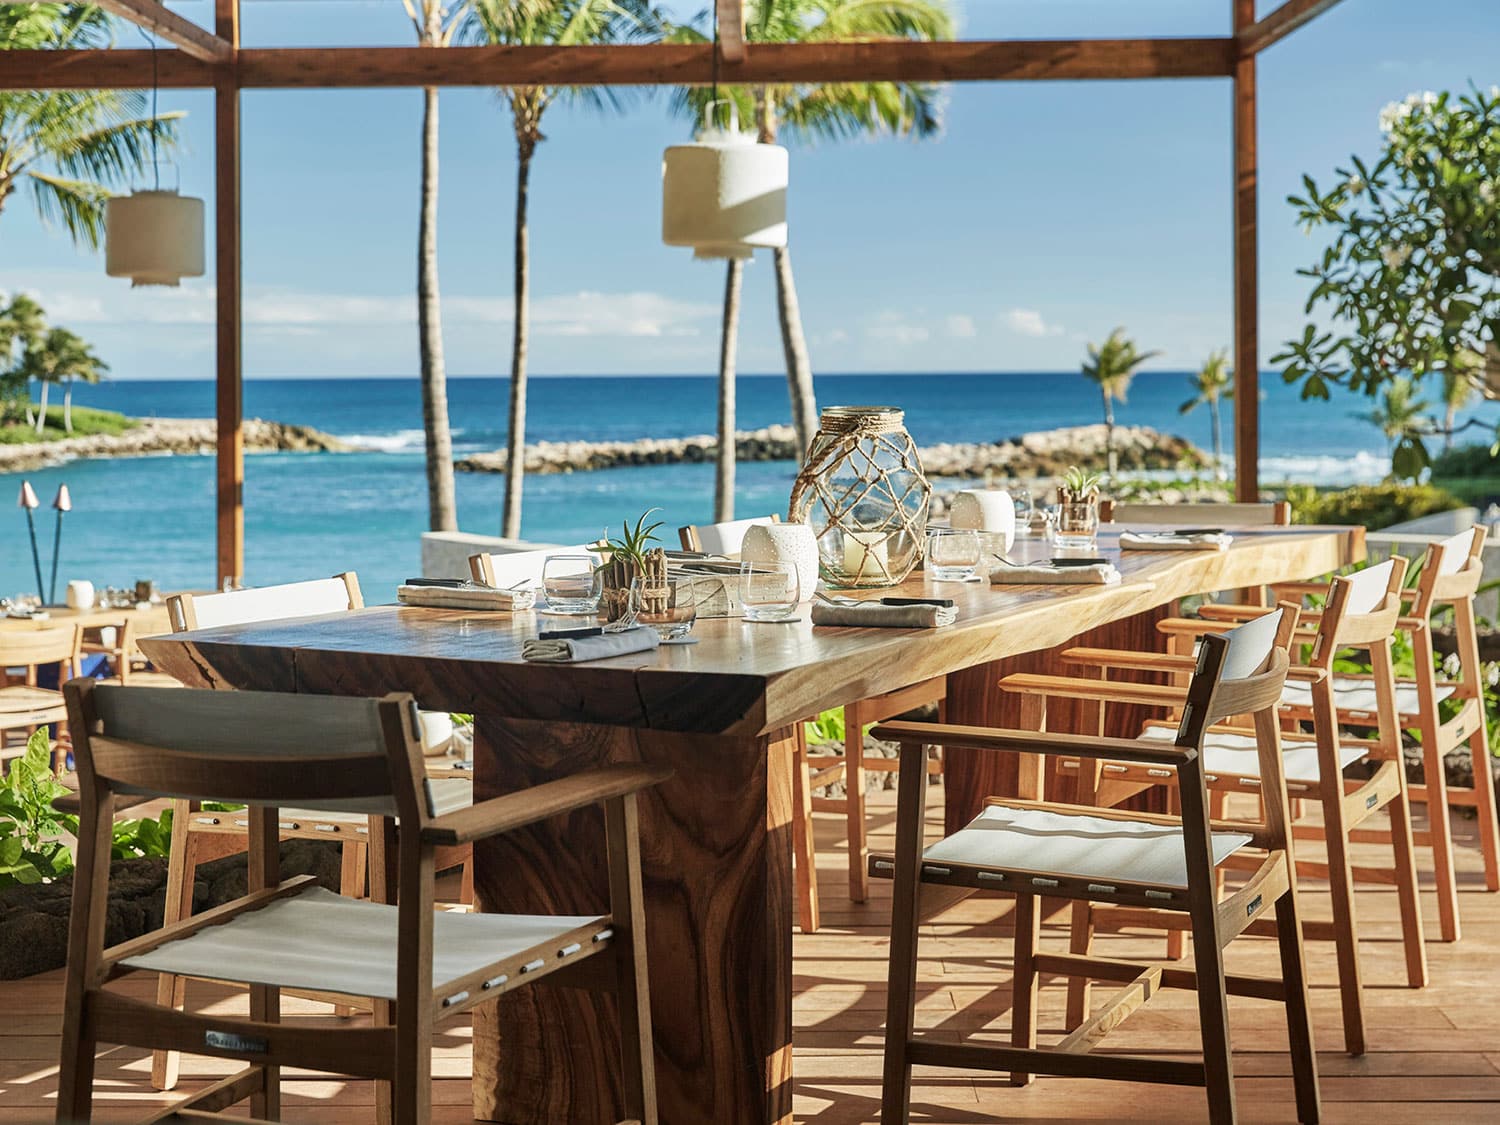 Fish House is one of the excellent dining options at The Four Seasons Resort at Ko Olina.